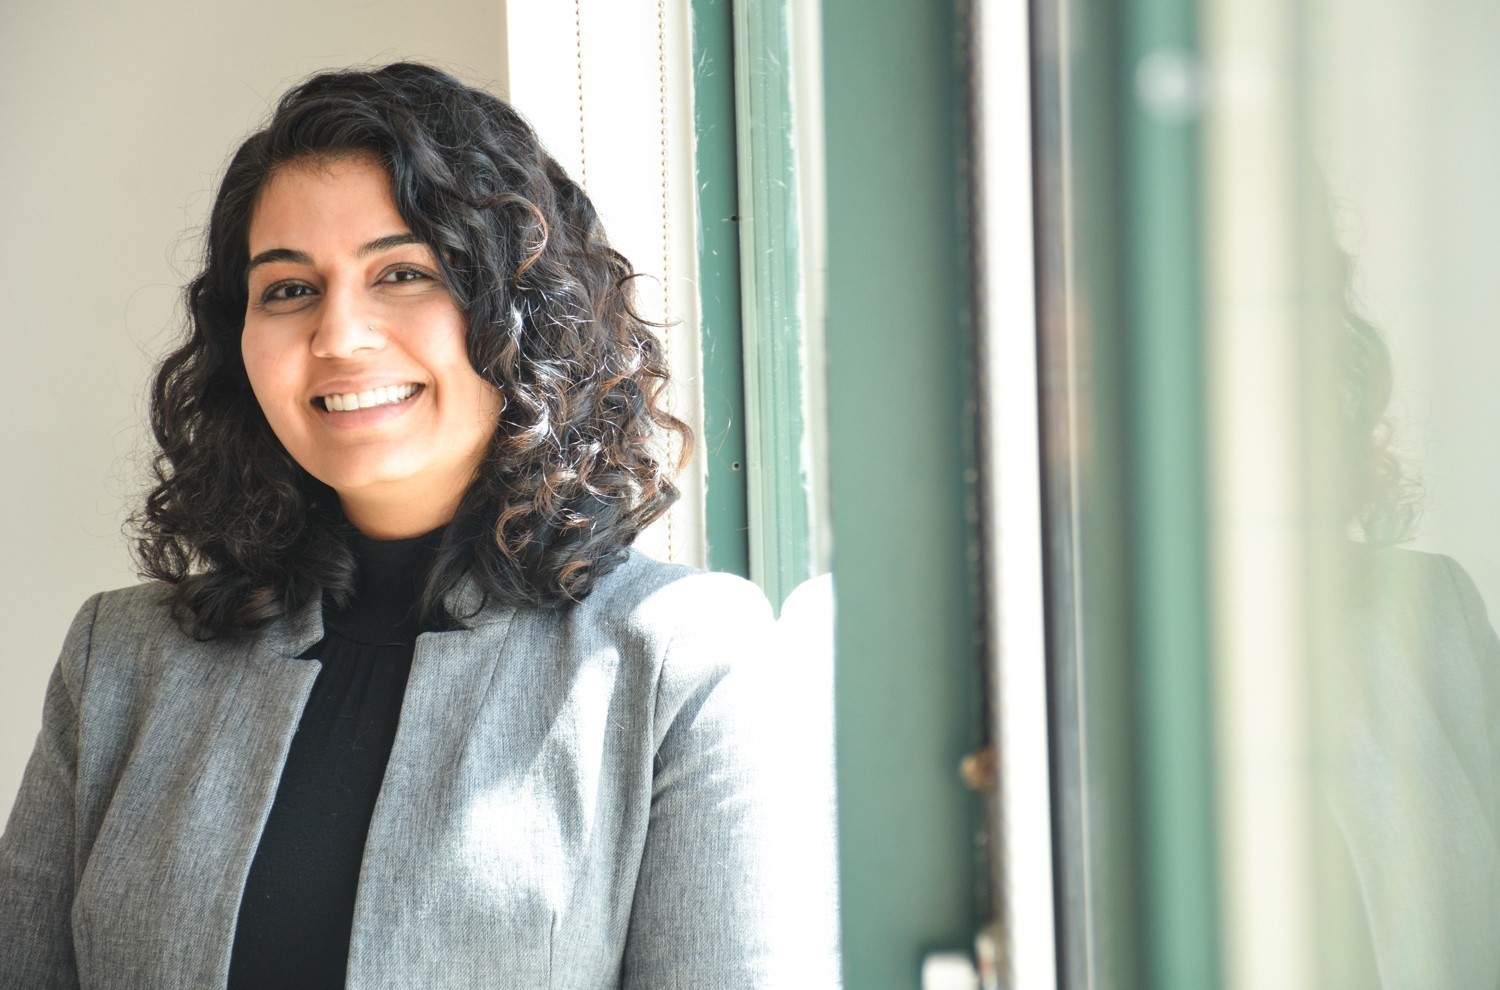 Healthcare and education were a focus for Brampton Centre’s Sara Singh throughout her first term